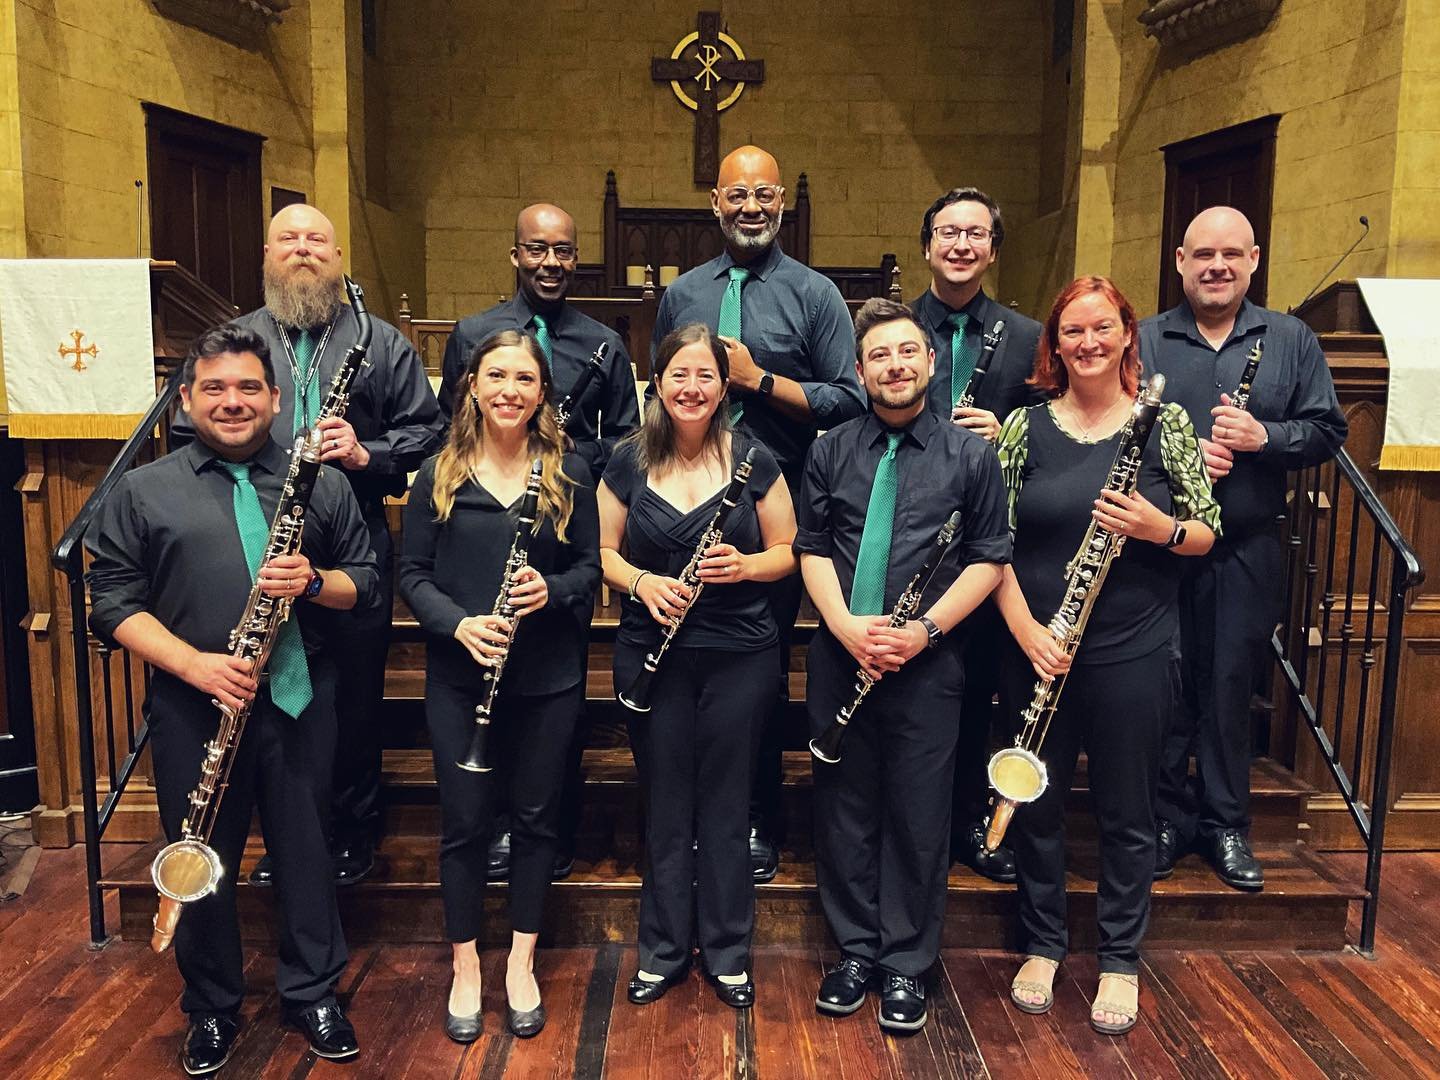 The second Celebrating National Chamber Music concert by @adelantewinds goes into the record books 🥳

We&rsquo;re so happy to have been included in the concert and to share some of our (and hopefully your) favorite Studio Ghibli music 🎶

San Antoni